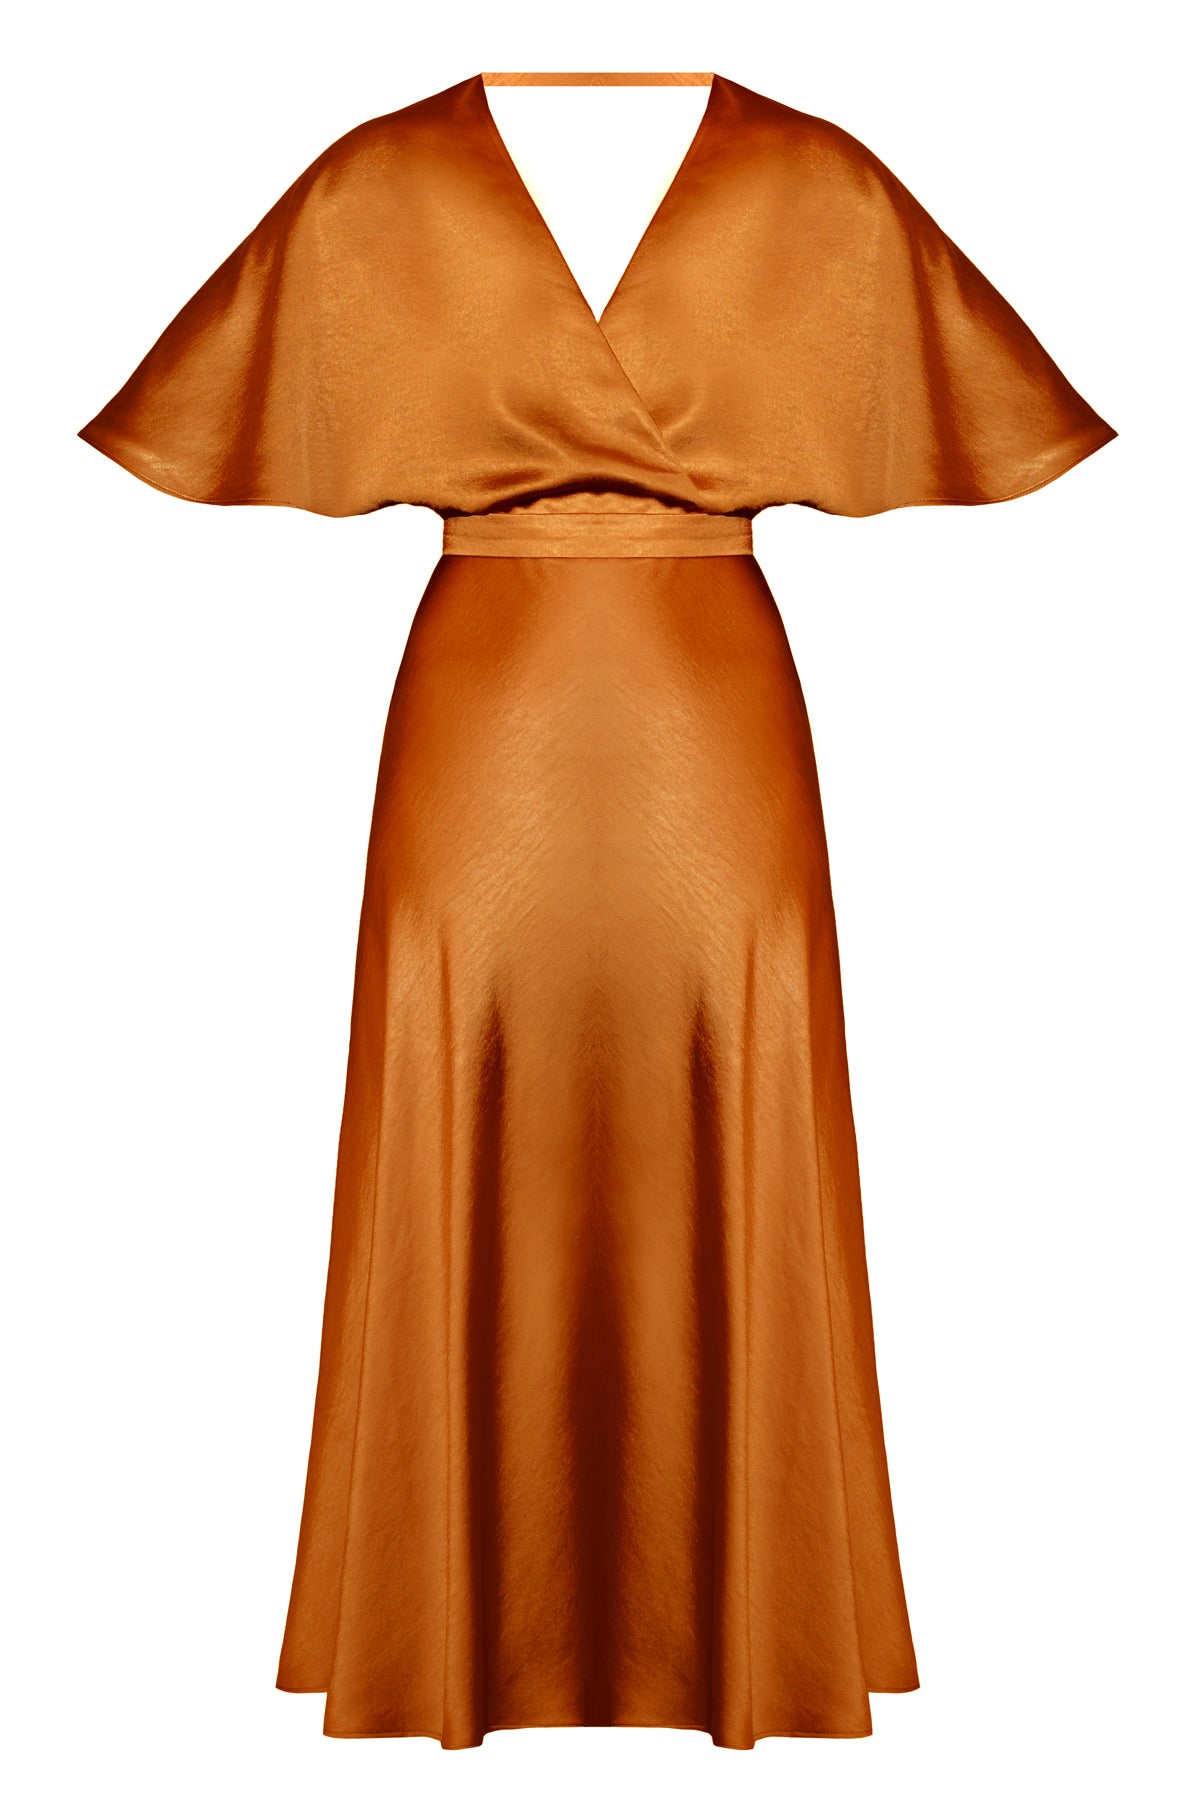 SONYA brown midi dress with butterfly sleeves